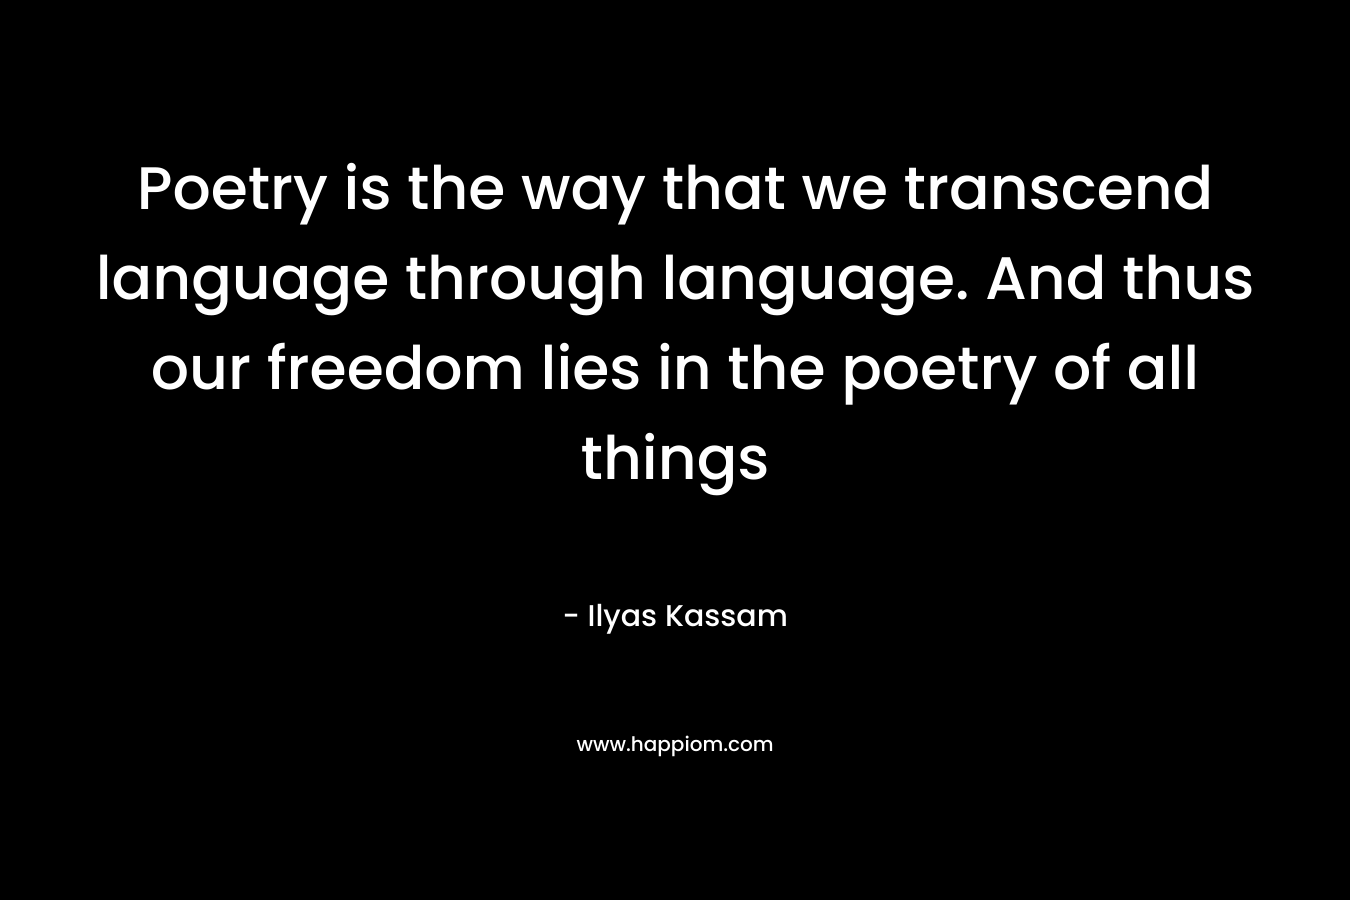 Poetry is the way that we transcend language through language. And thus our freedom lies in the poetry of all things